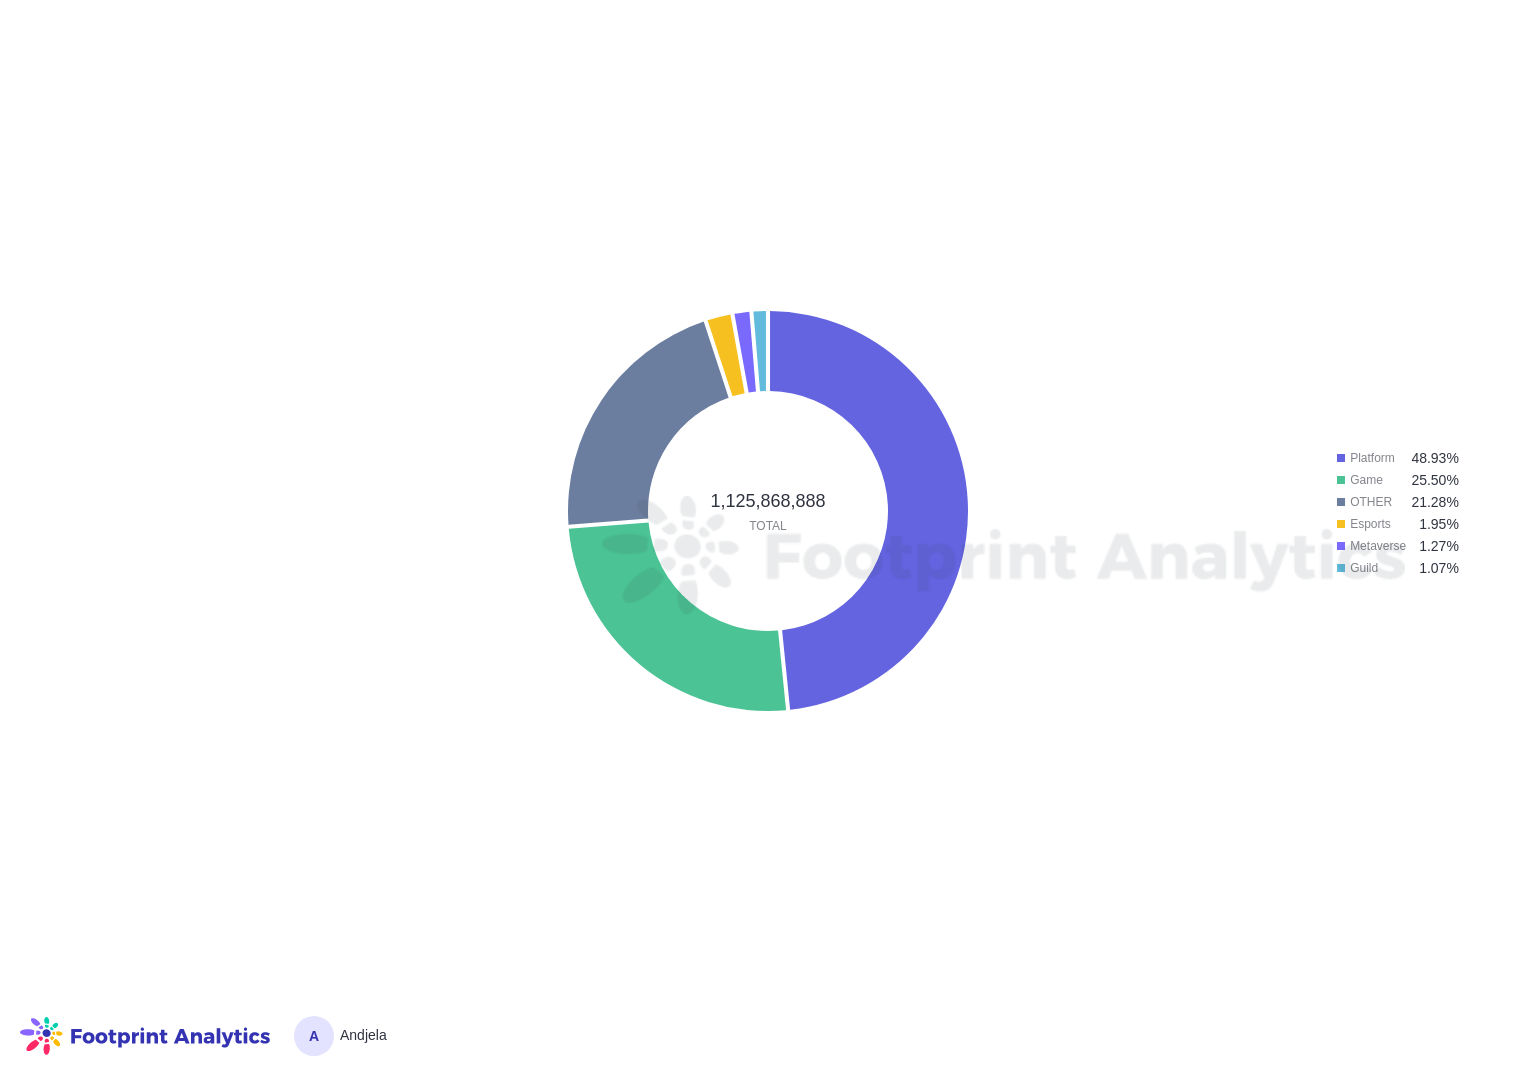 GameFi funding by project type (Source: Footprint Analytics)